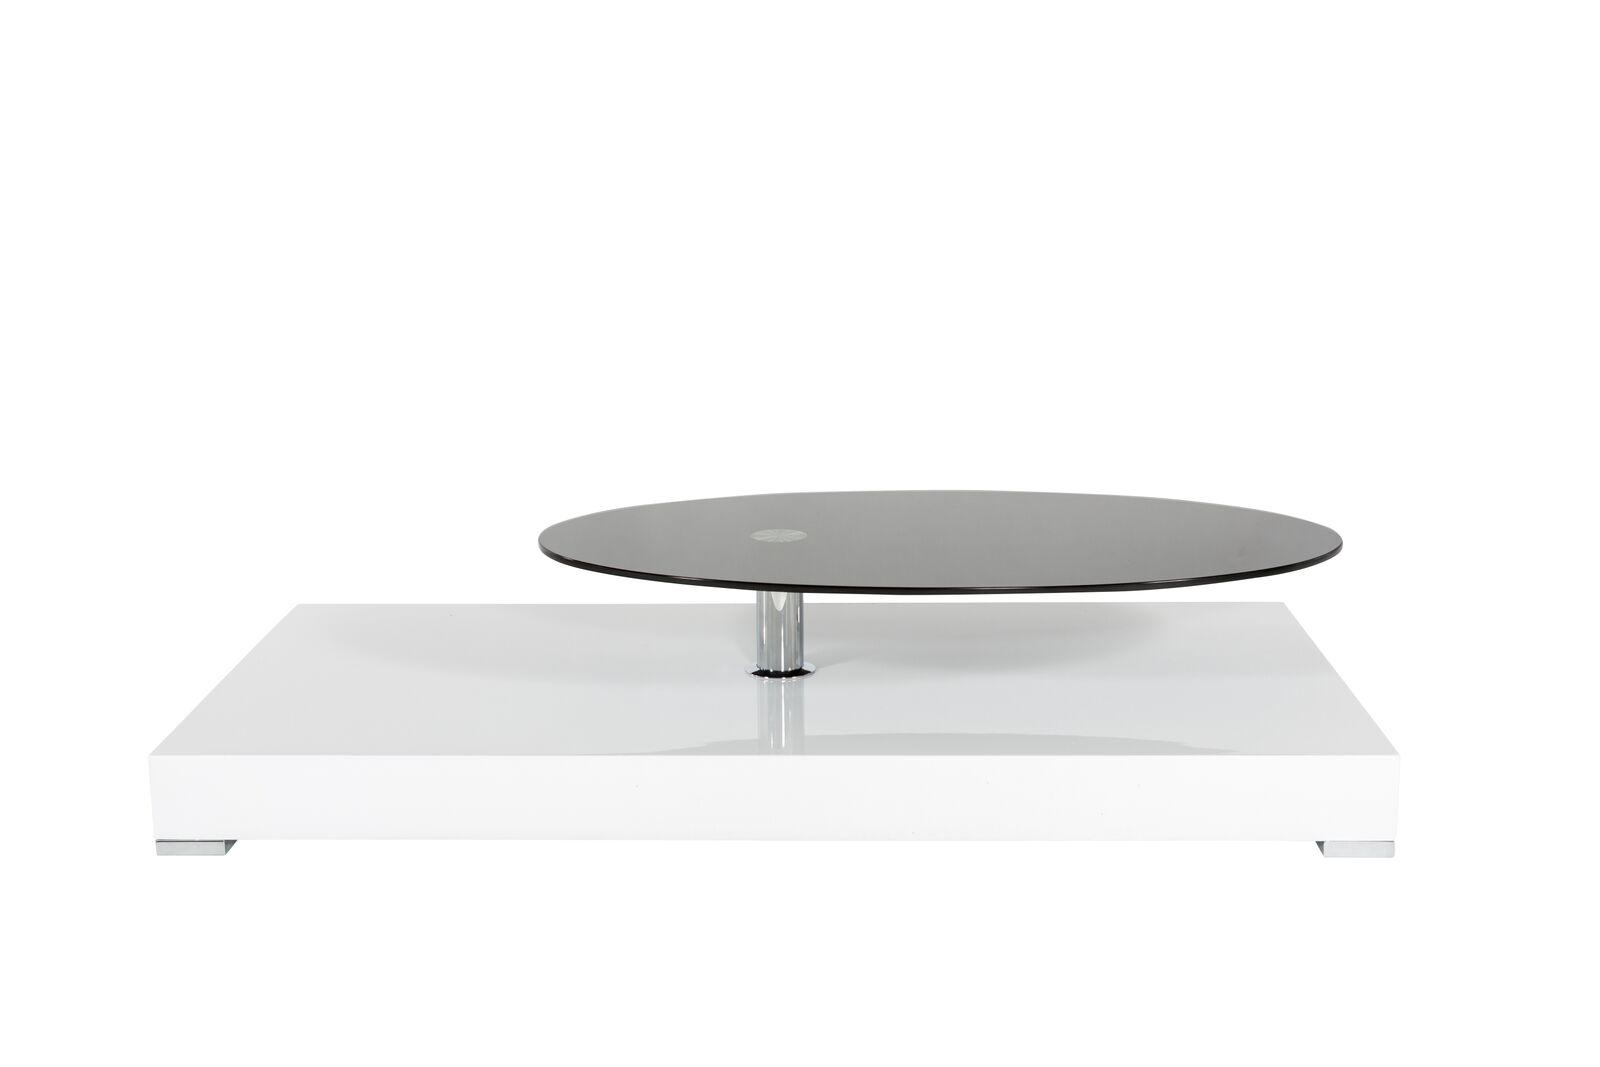 At Home USA C7391 Coffe Table